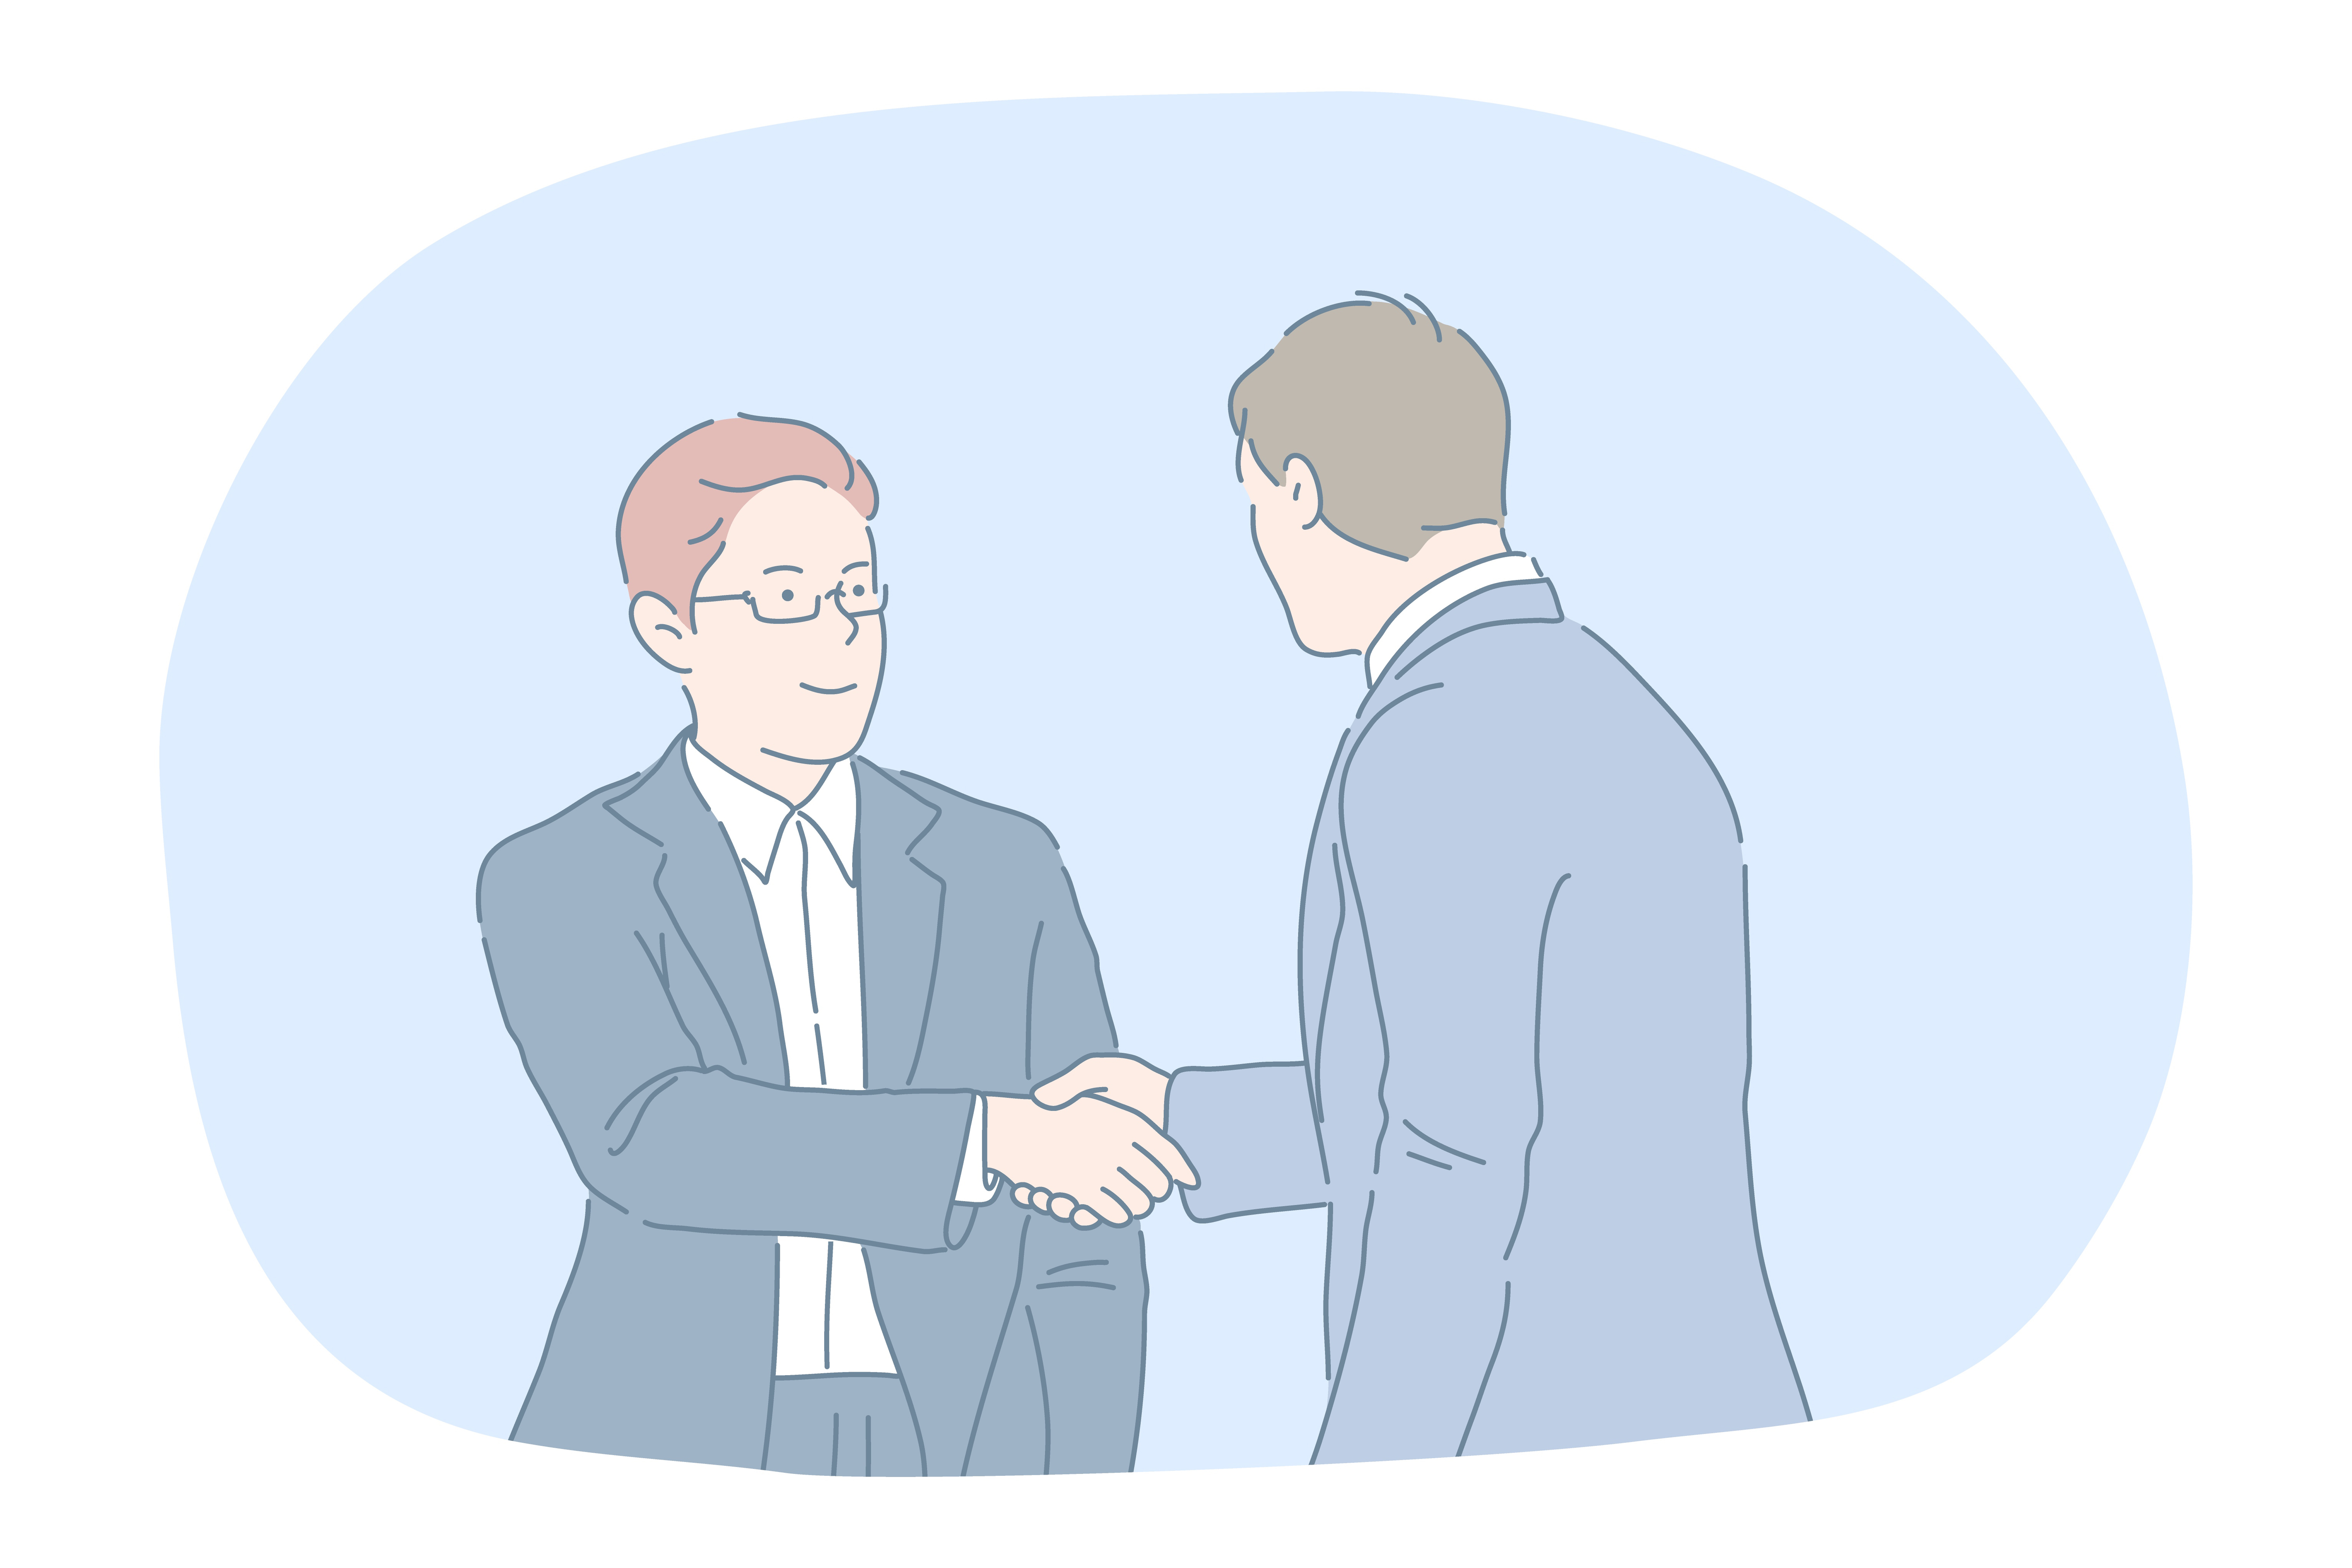 Agreement, deal, business, successful negotiations, teamwork concept. Young businessmen in official suits cartoon characters standing and shaking hands after negotiations in office . Agreement, deal, business, successful negotiations, teamwork concept